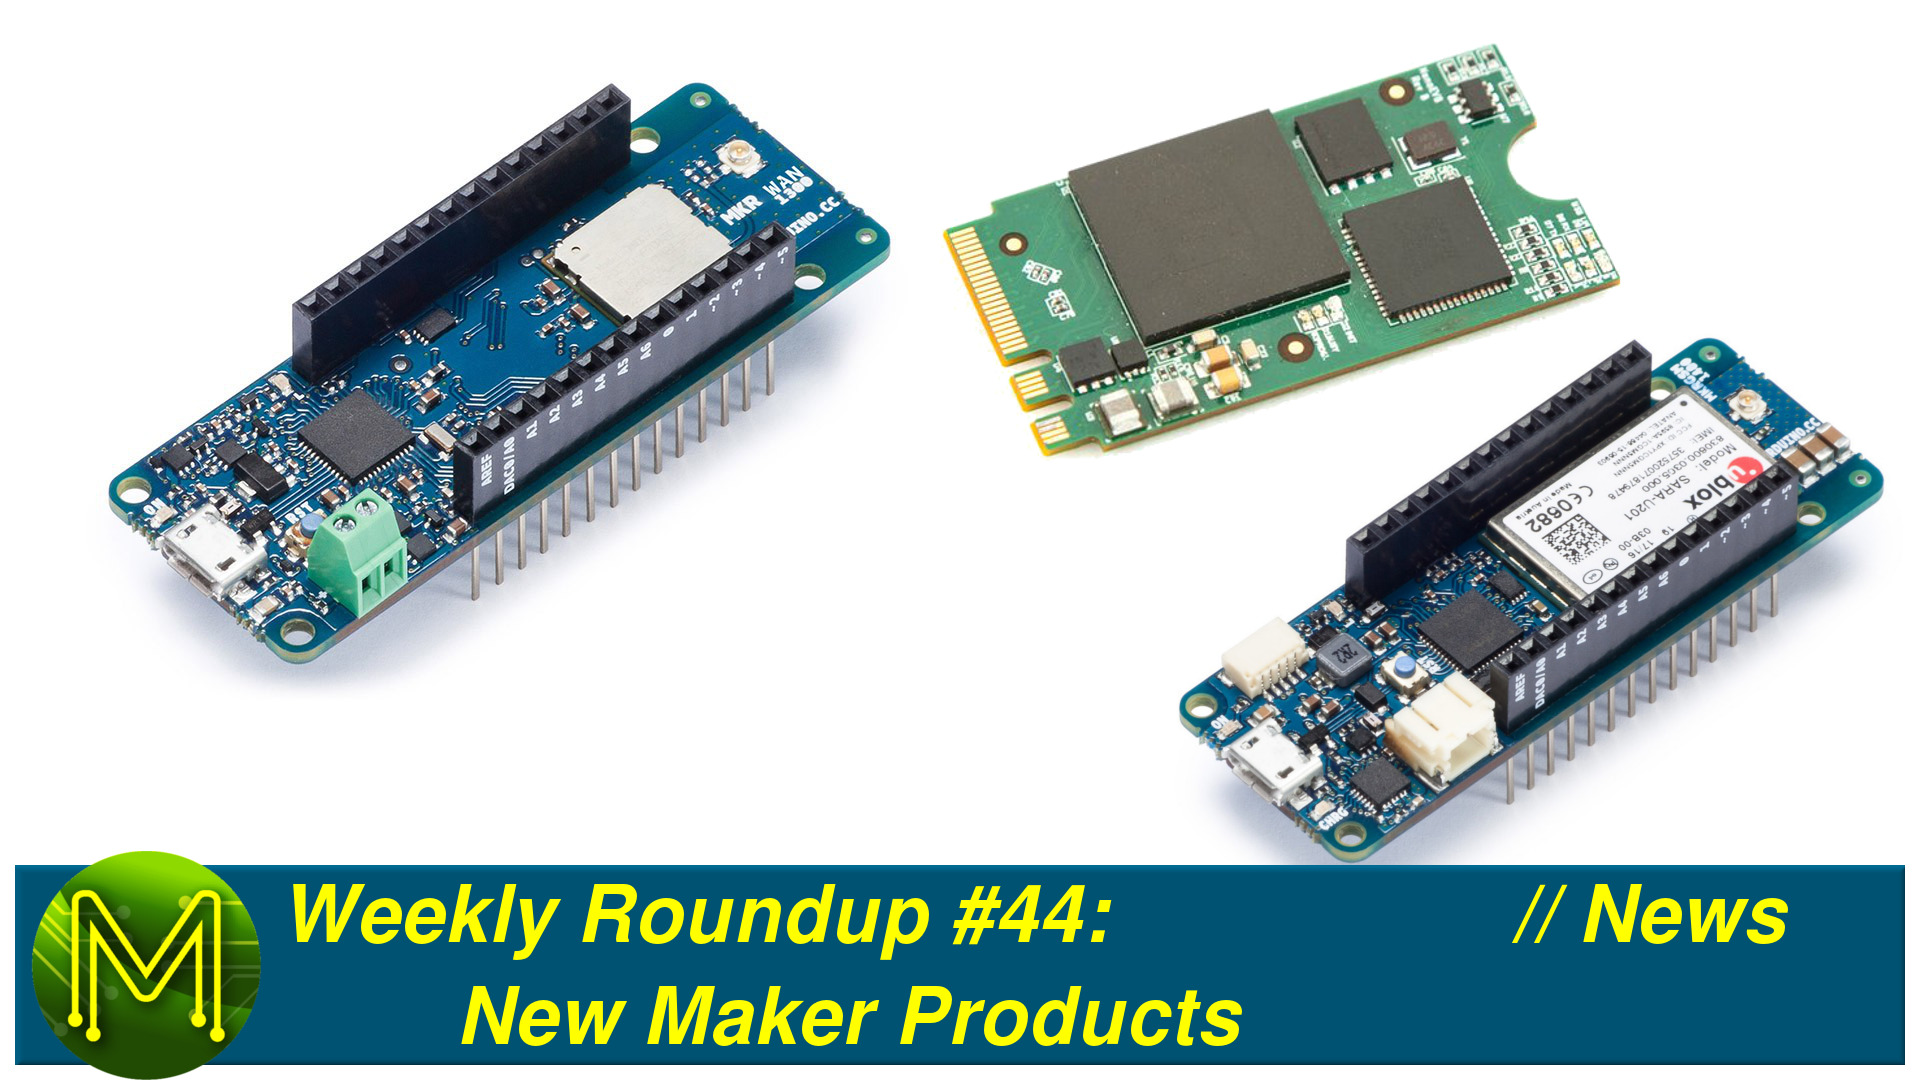 Weekly Roundup #44 - New Maker Products // News